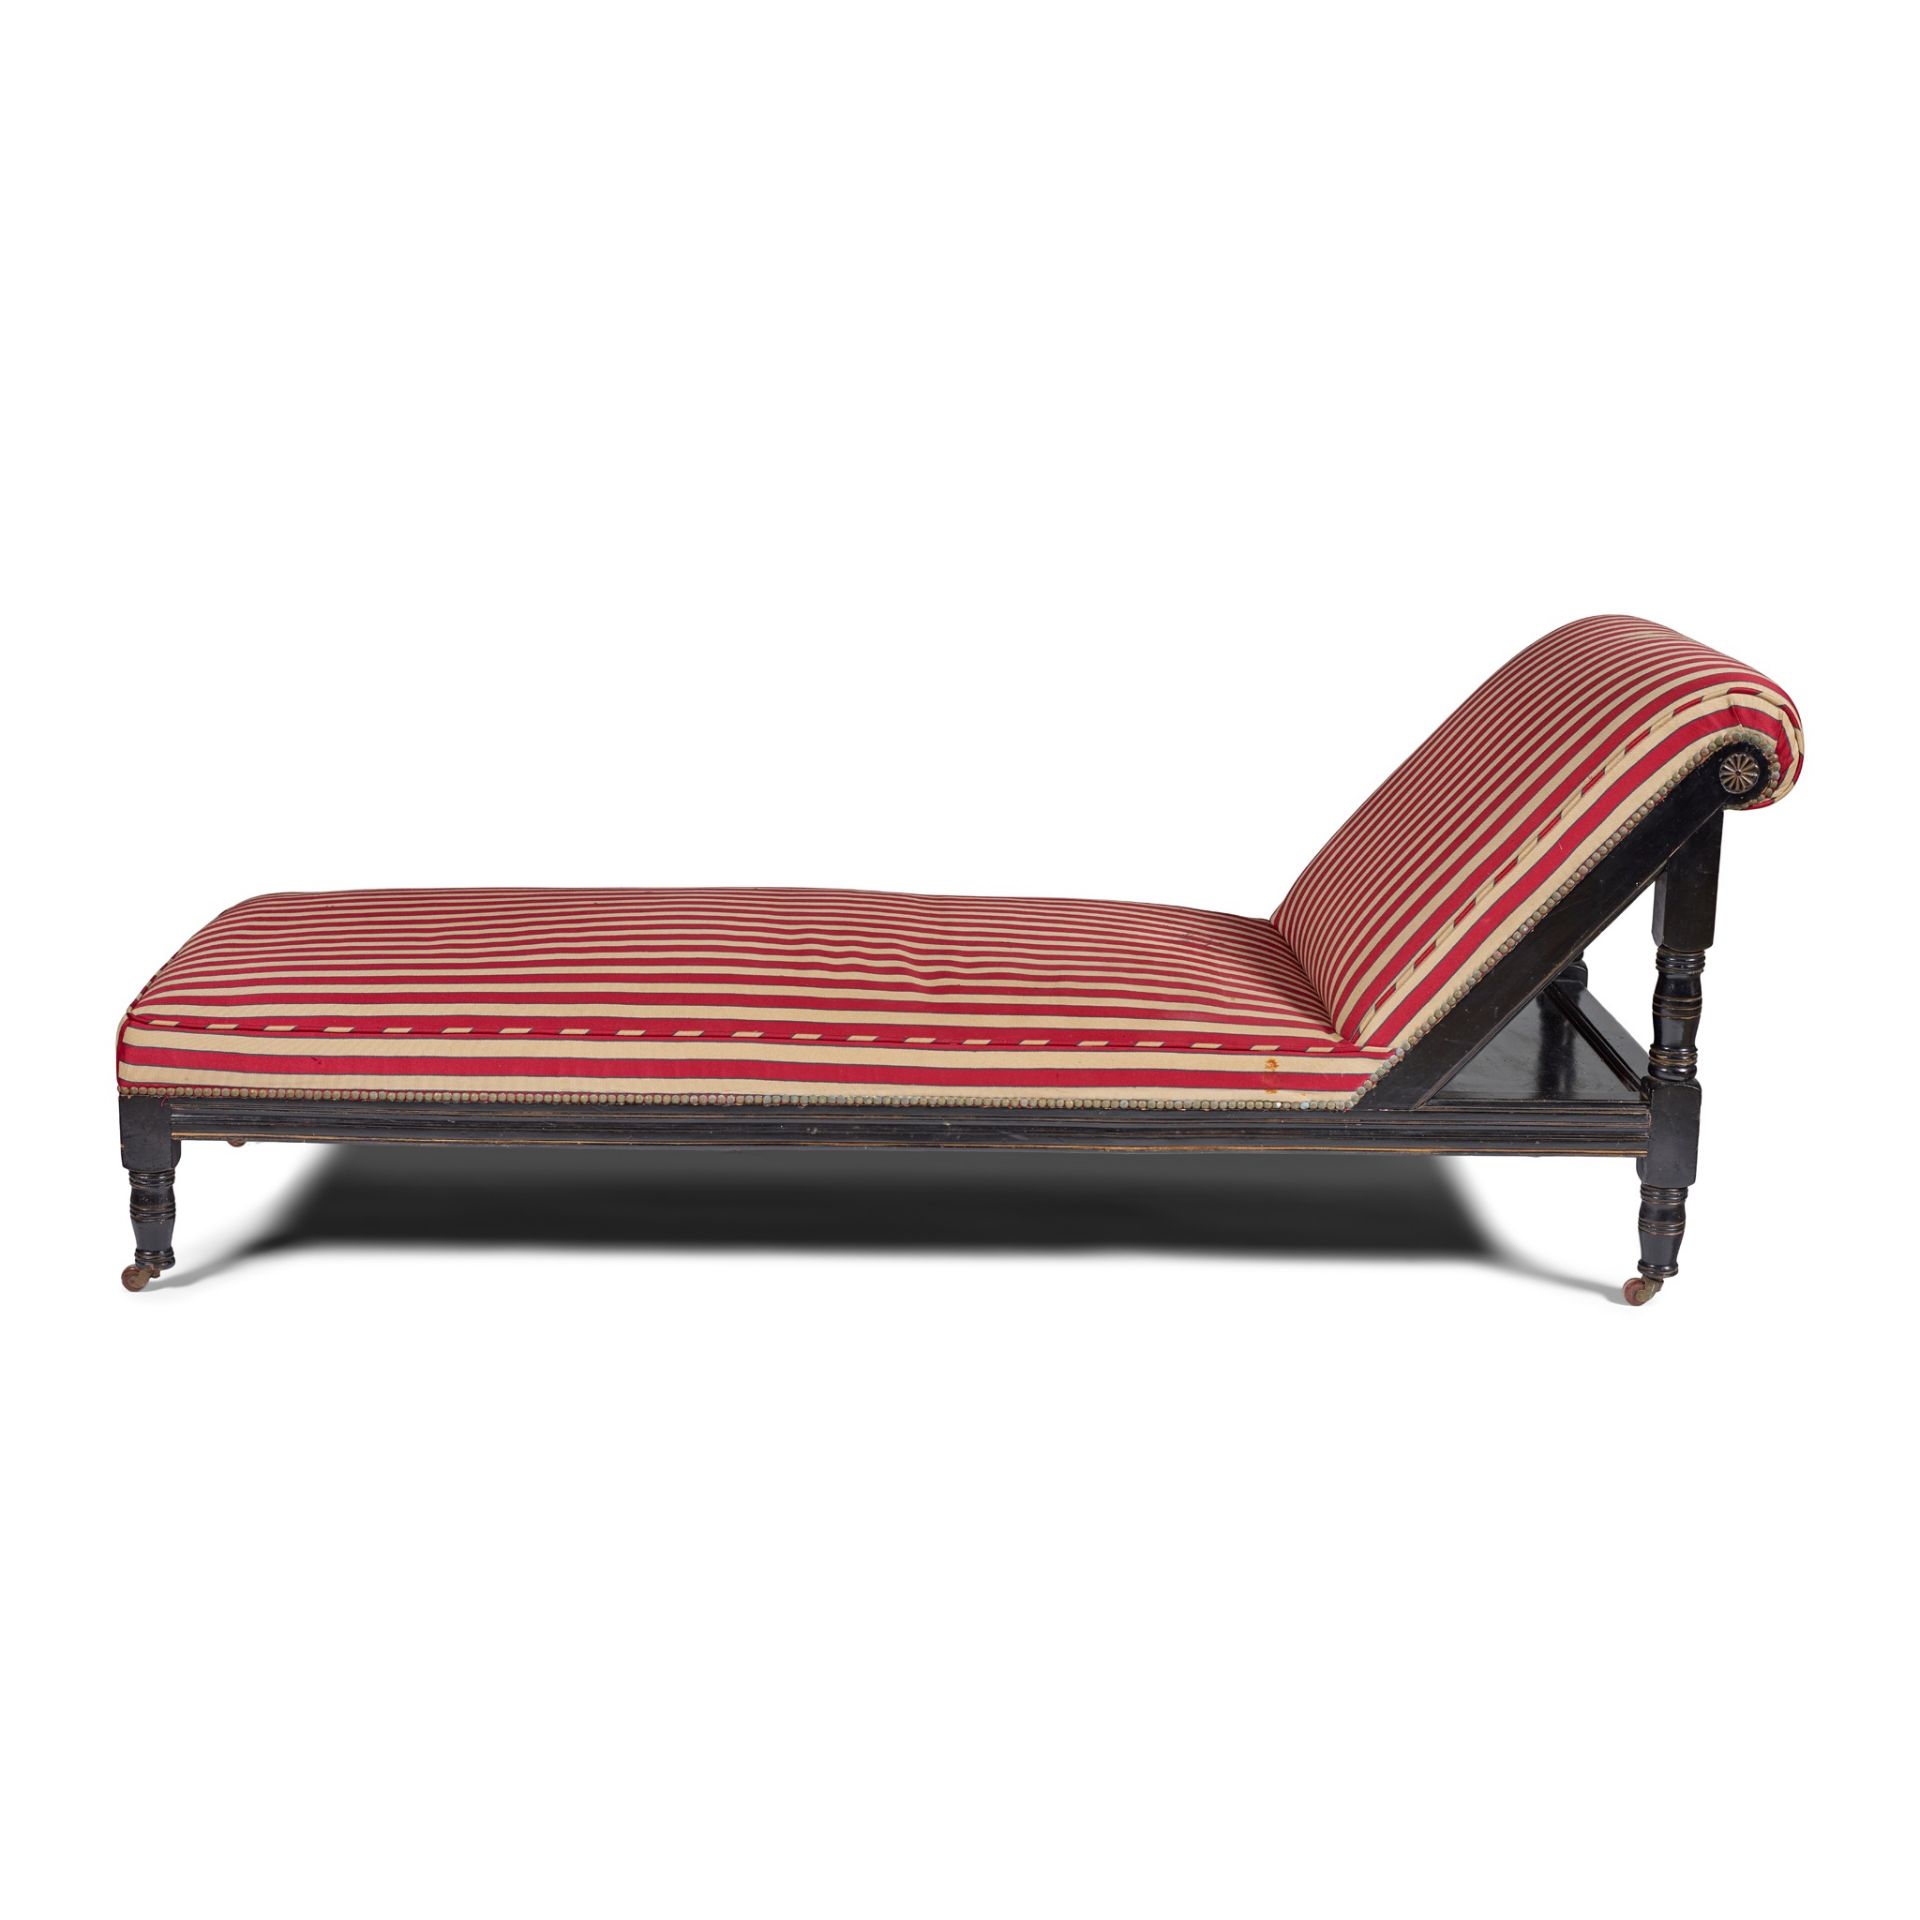 COLLINSON & LOCK, LONDON (ATTRIBUTED MAKER) AESTHETIC MOVEMENT CHAISE LONGUE, CIRCA 1870 - Image 2 of 3